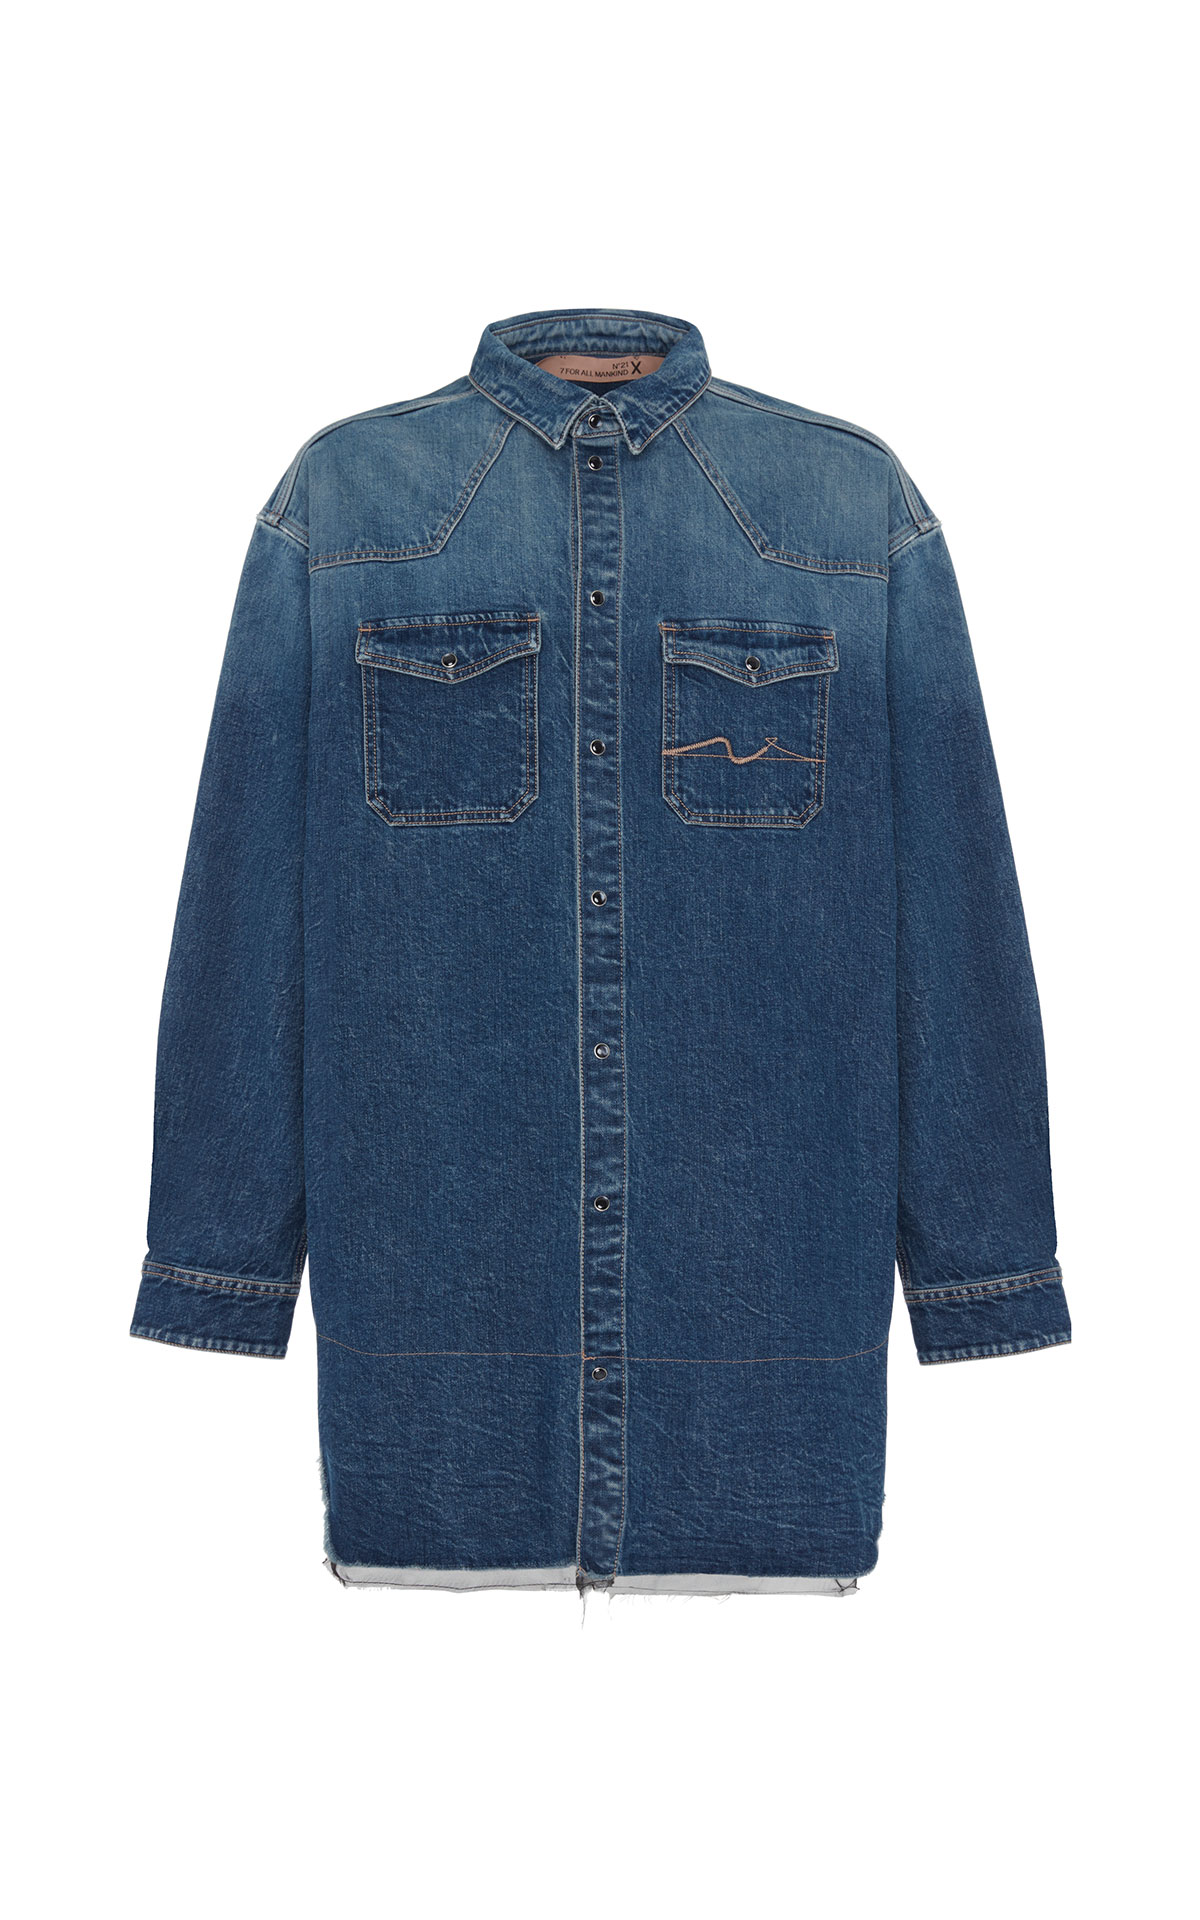 7 For All Mankind Overshirt indigo with chiffon from Bicester Village